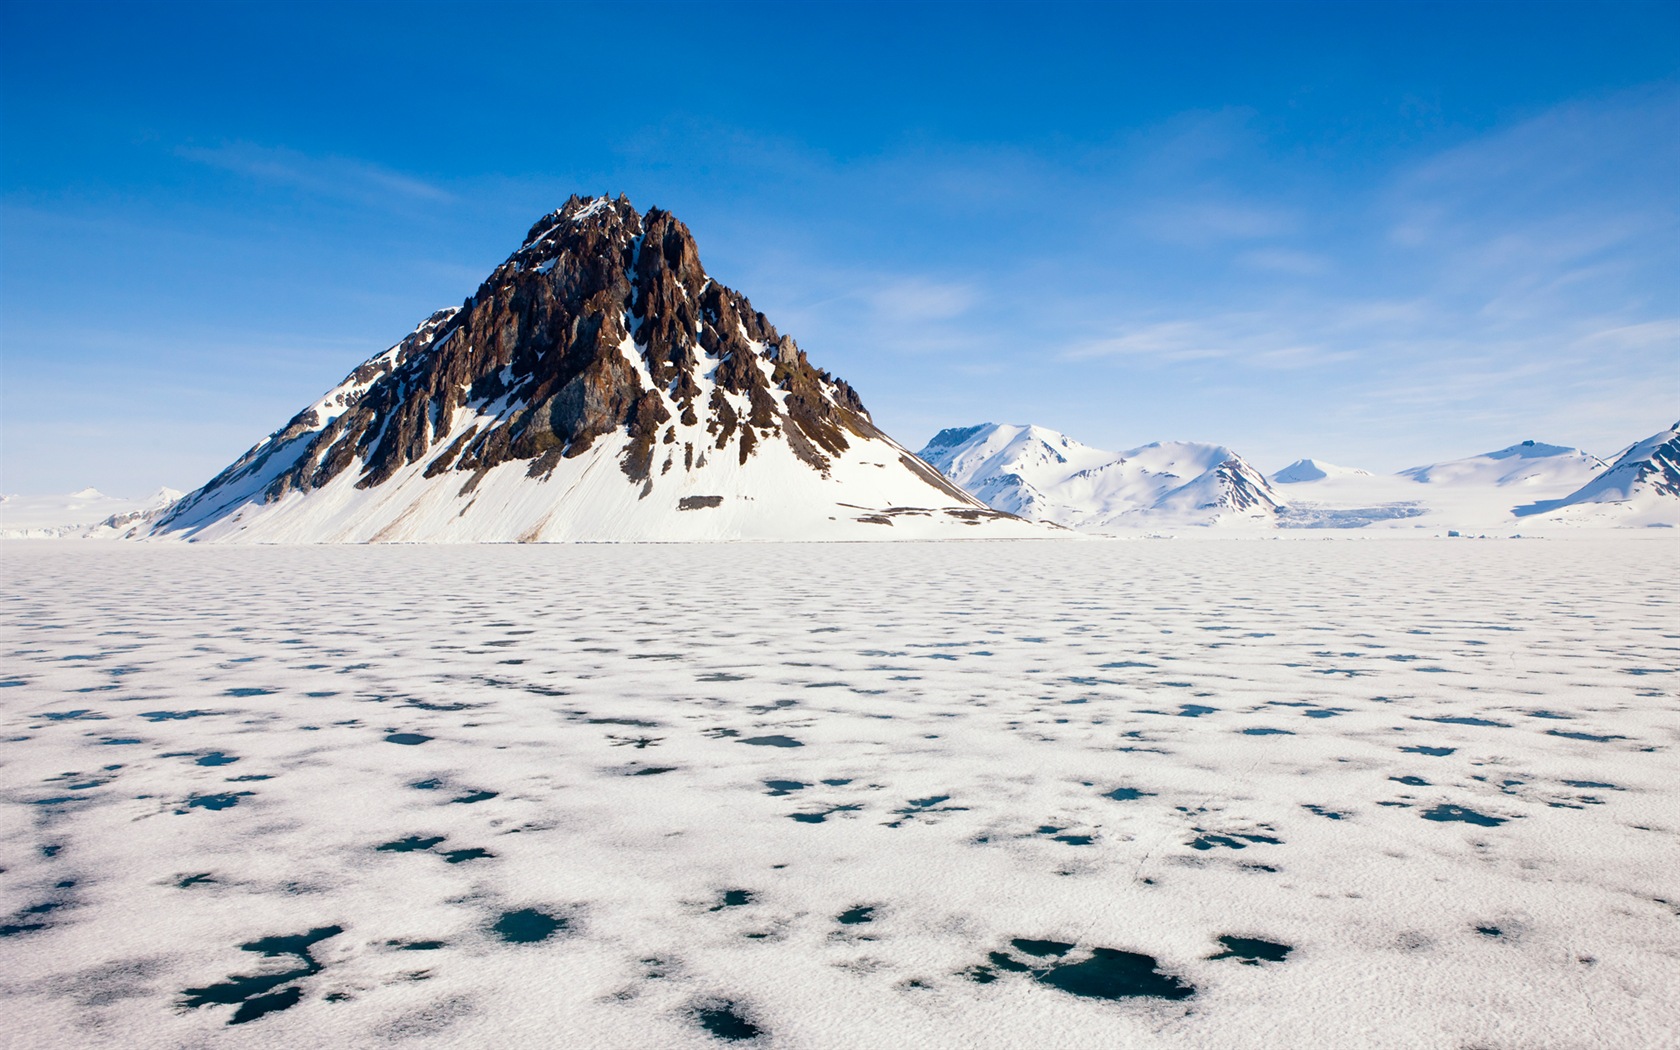 Windows 8 Wallpapers: Arctic, the nature ecological landscape, arctic animals #1 - 1680x1050